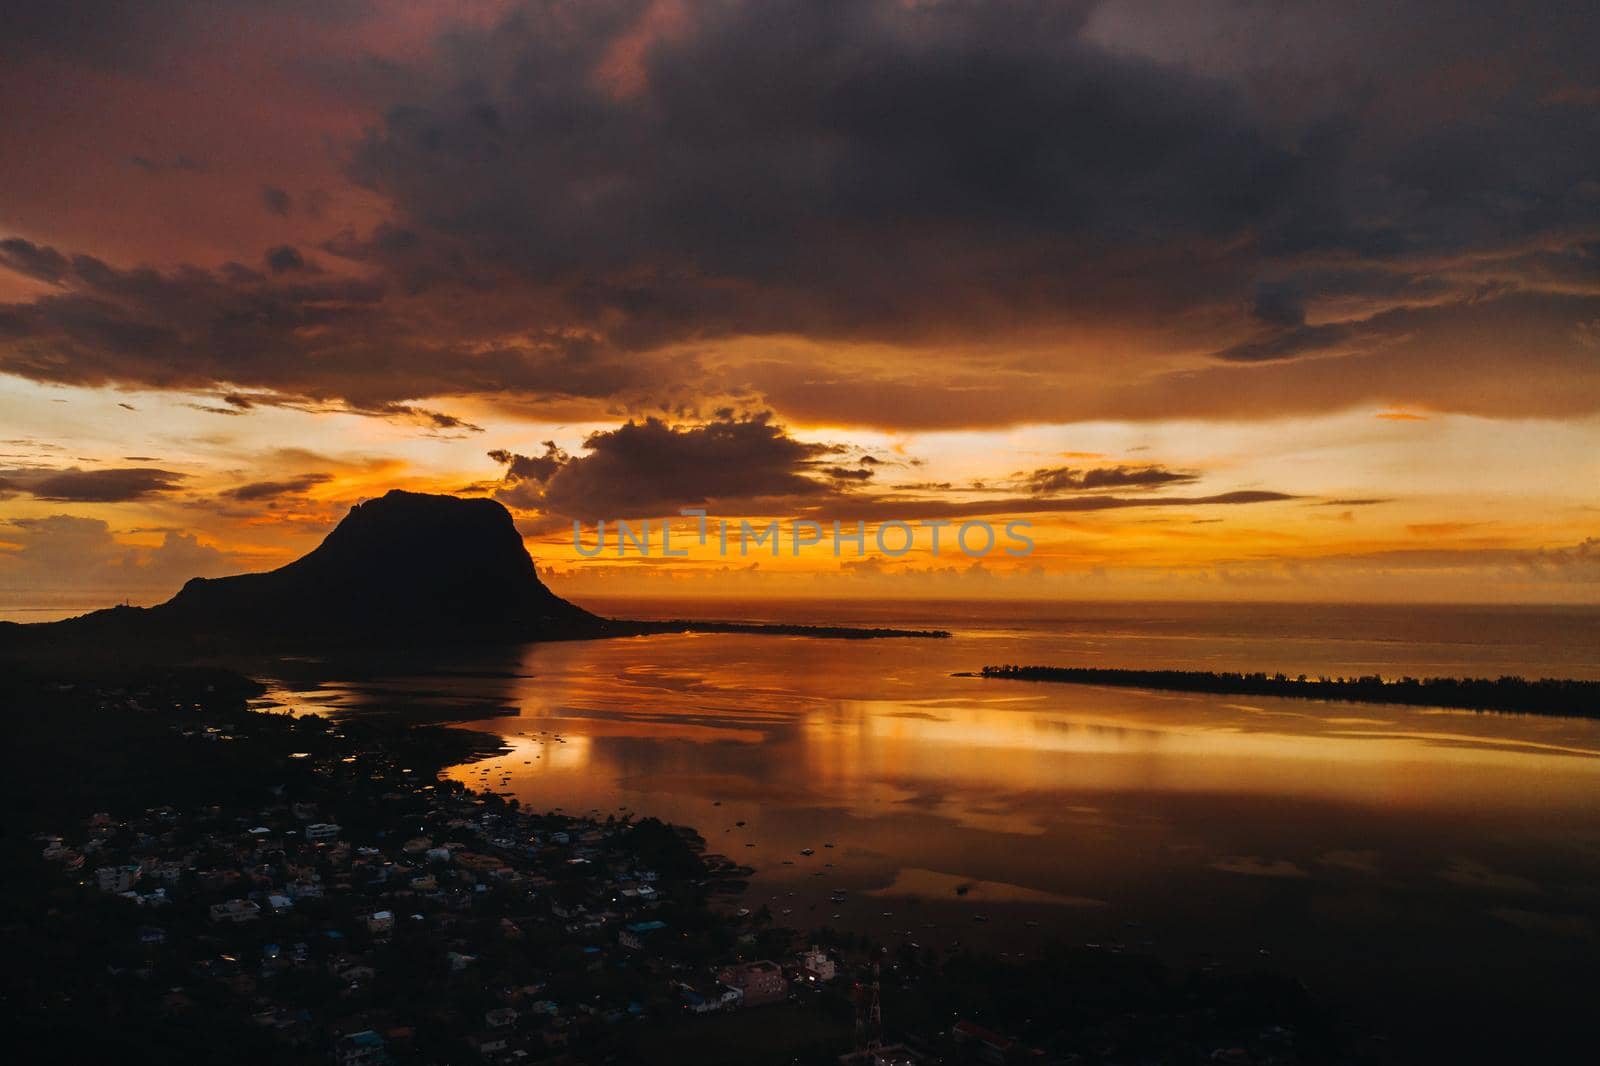 Amazing view of Le Morne Brabant at sunset. Mauritius island. by Lobachad